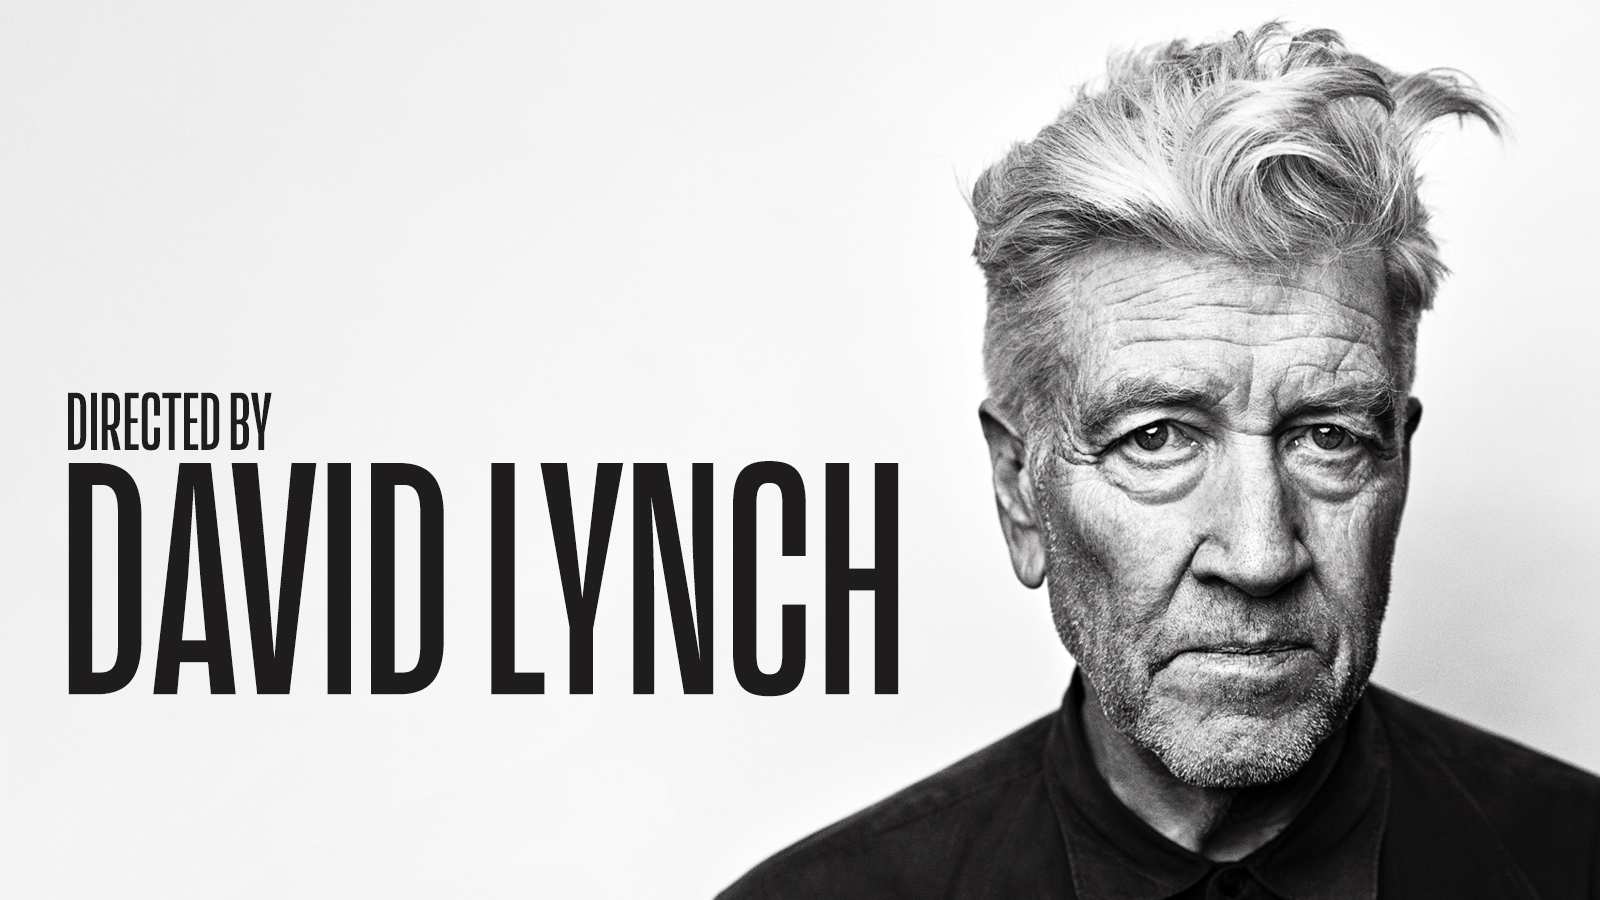 Directed by David Lynch - The Criterion Channel